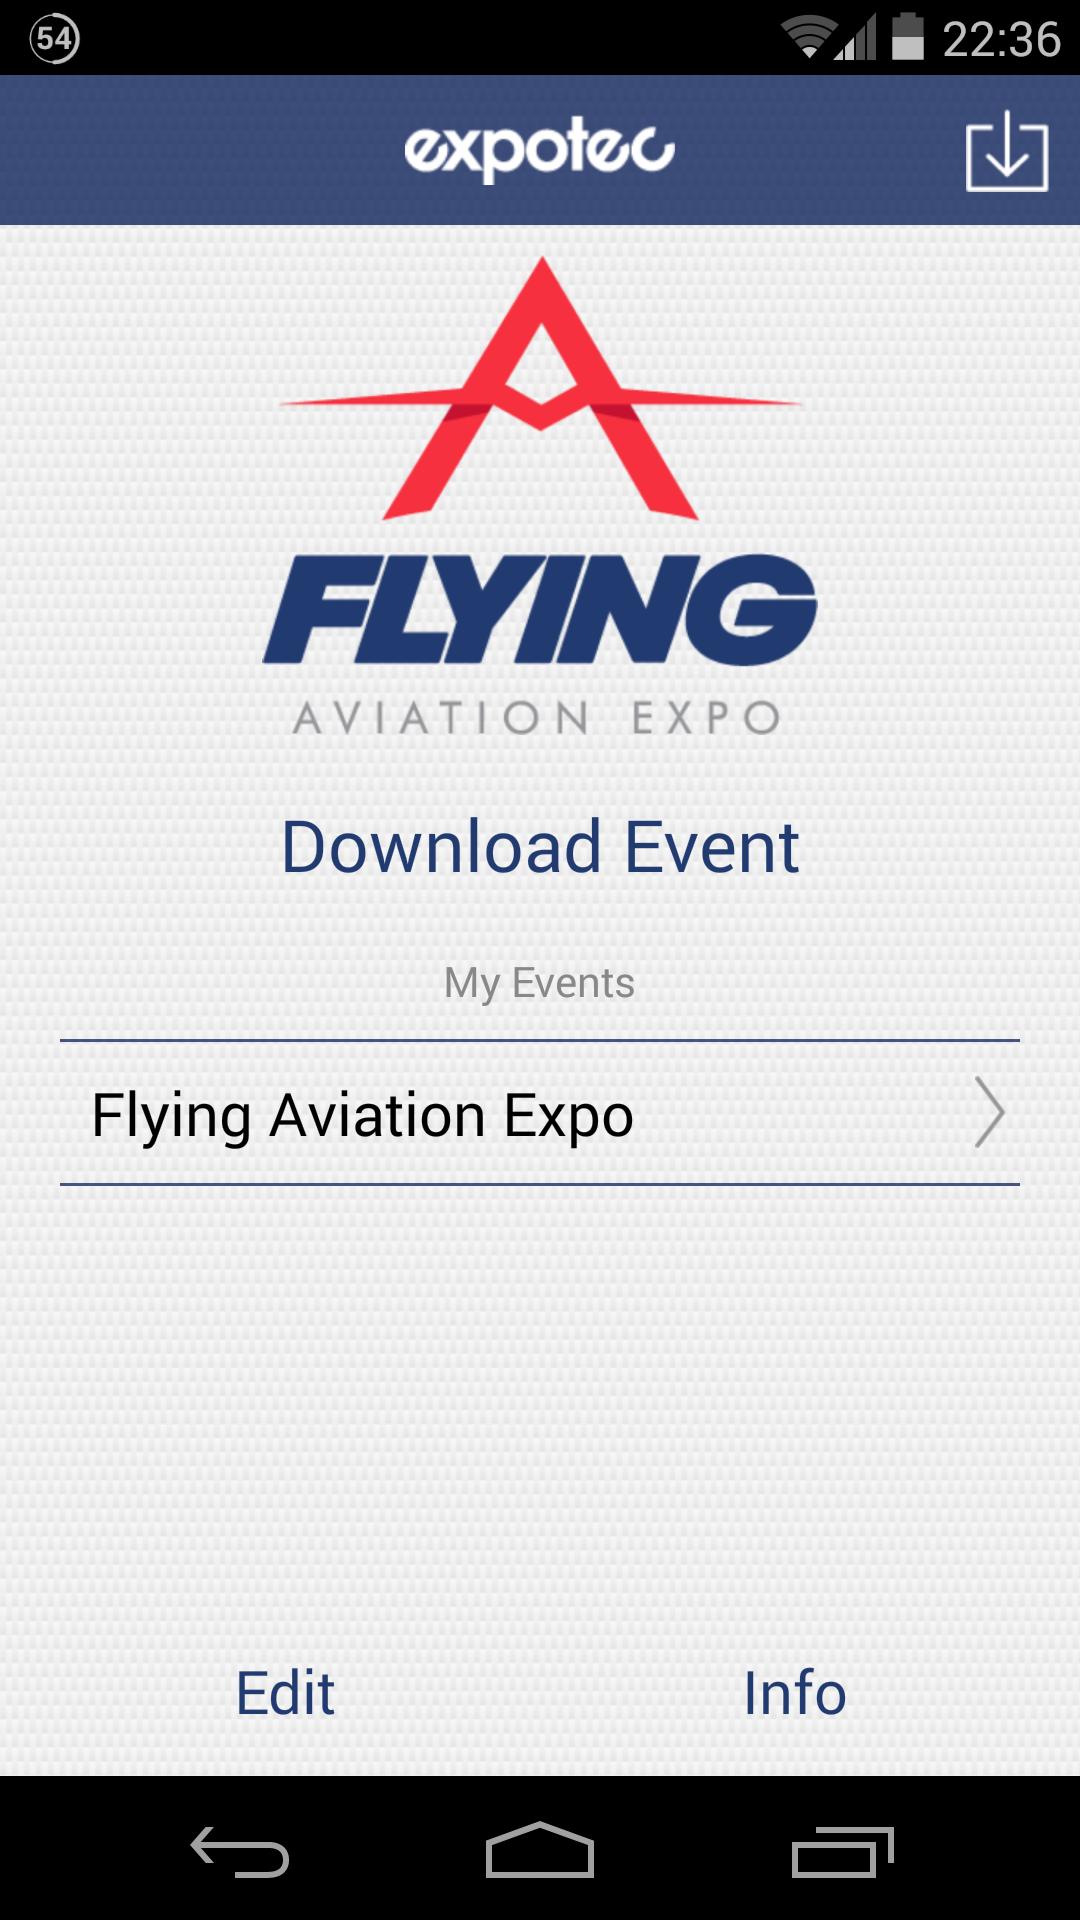 Expo app. Expo Aviation. Flying Android. Expo application services.